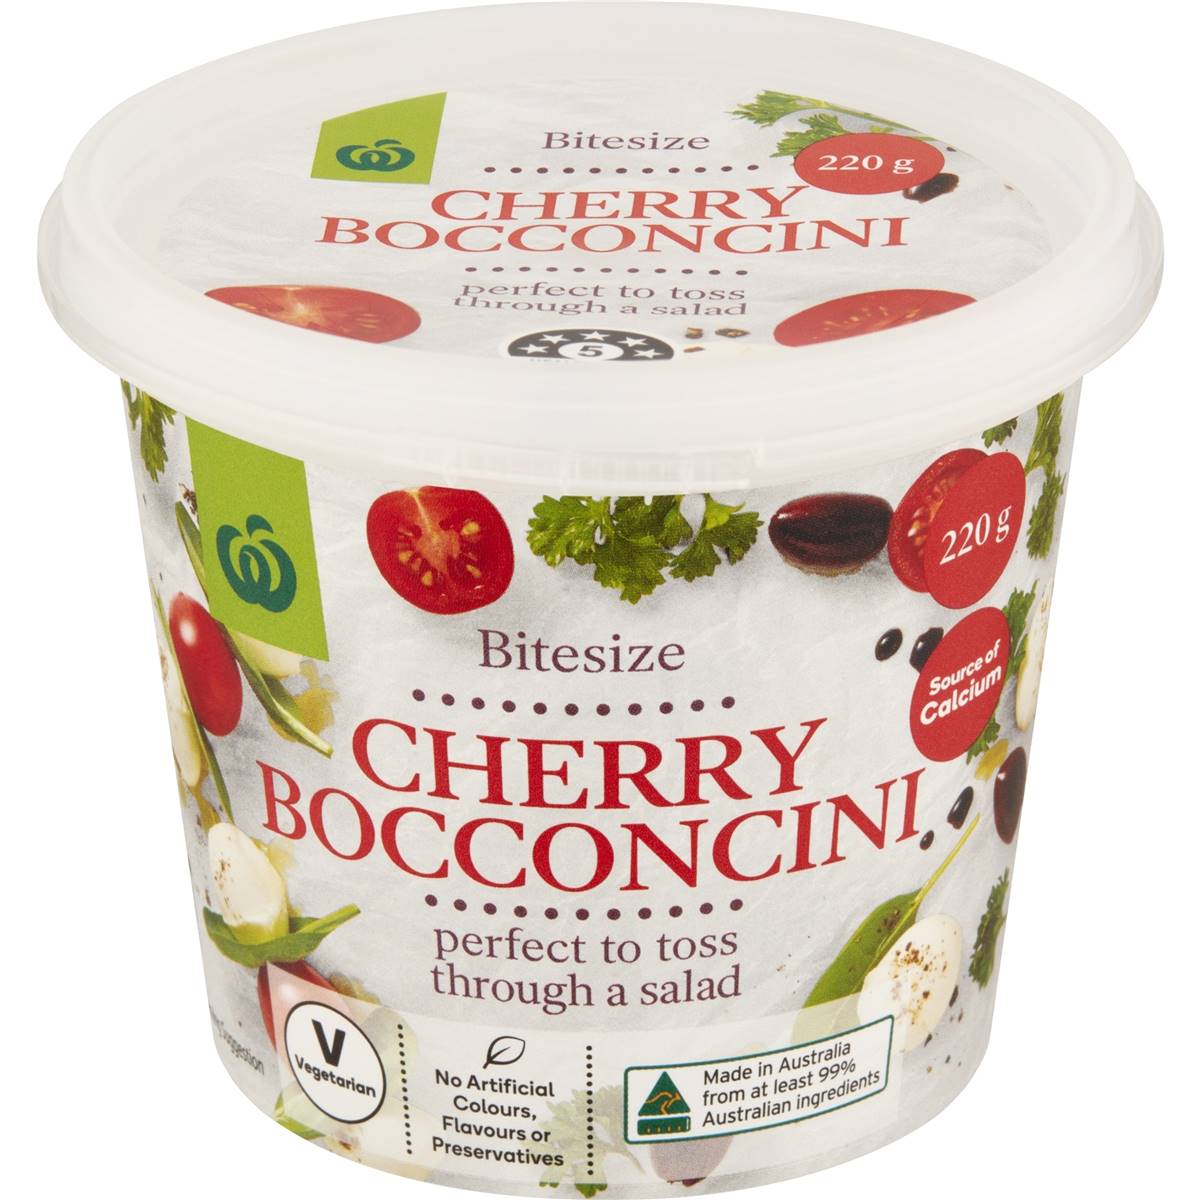 Calories in Woolworths Cherry Bocconcini